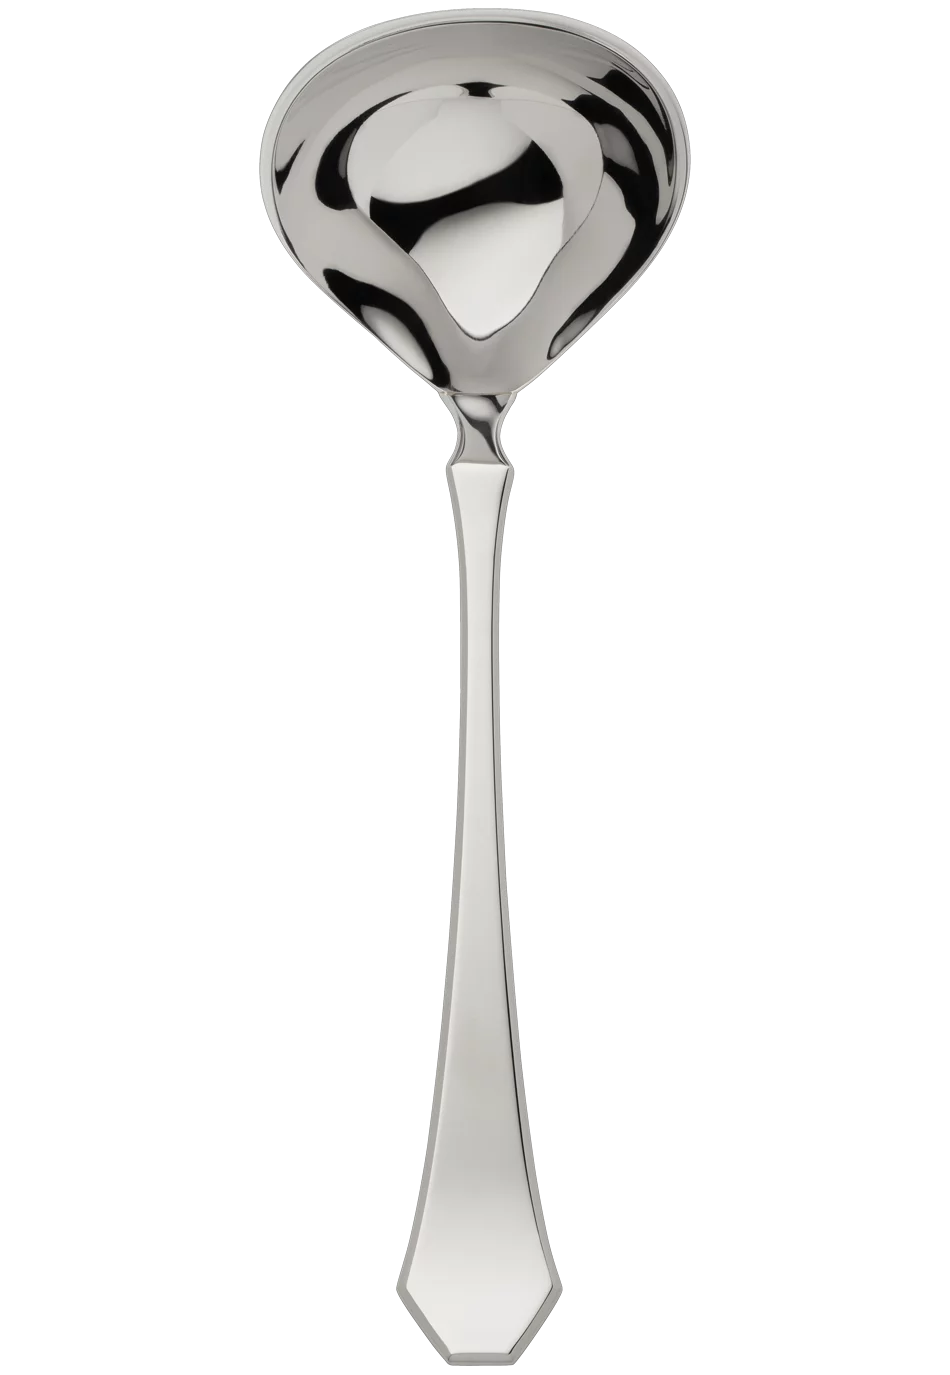 Baltic Soup Ladle (18/8 stainless steel)